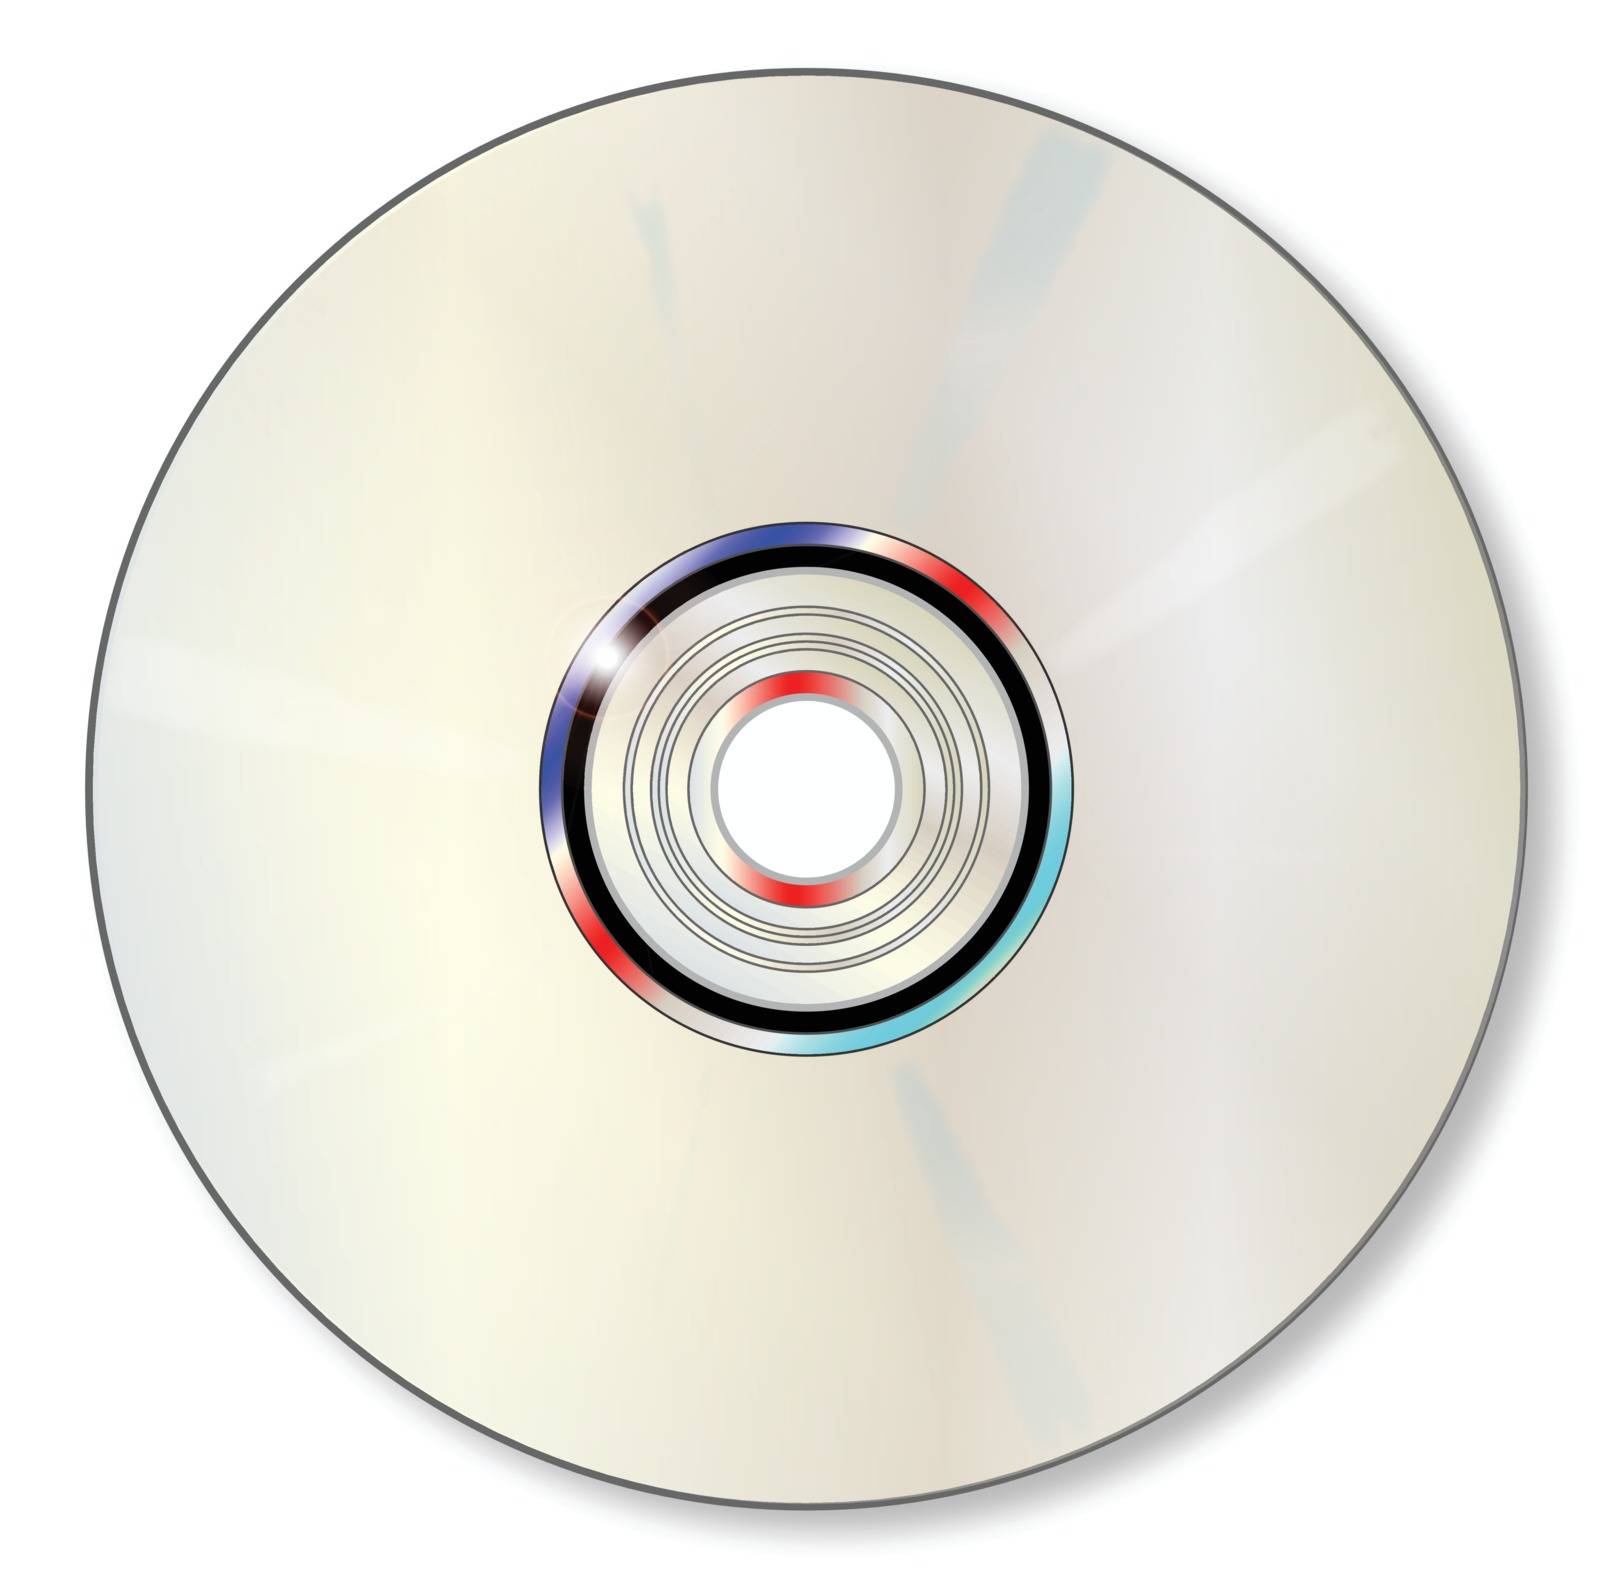 A blank DVD over a white background